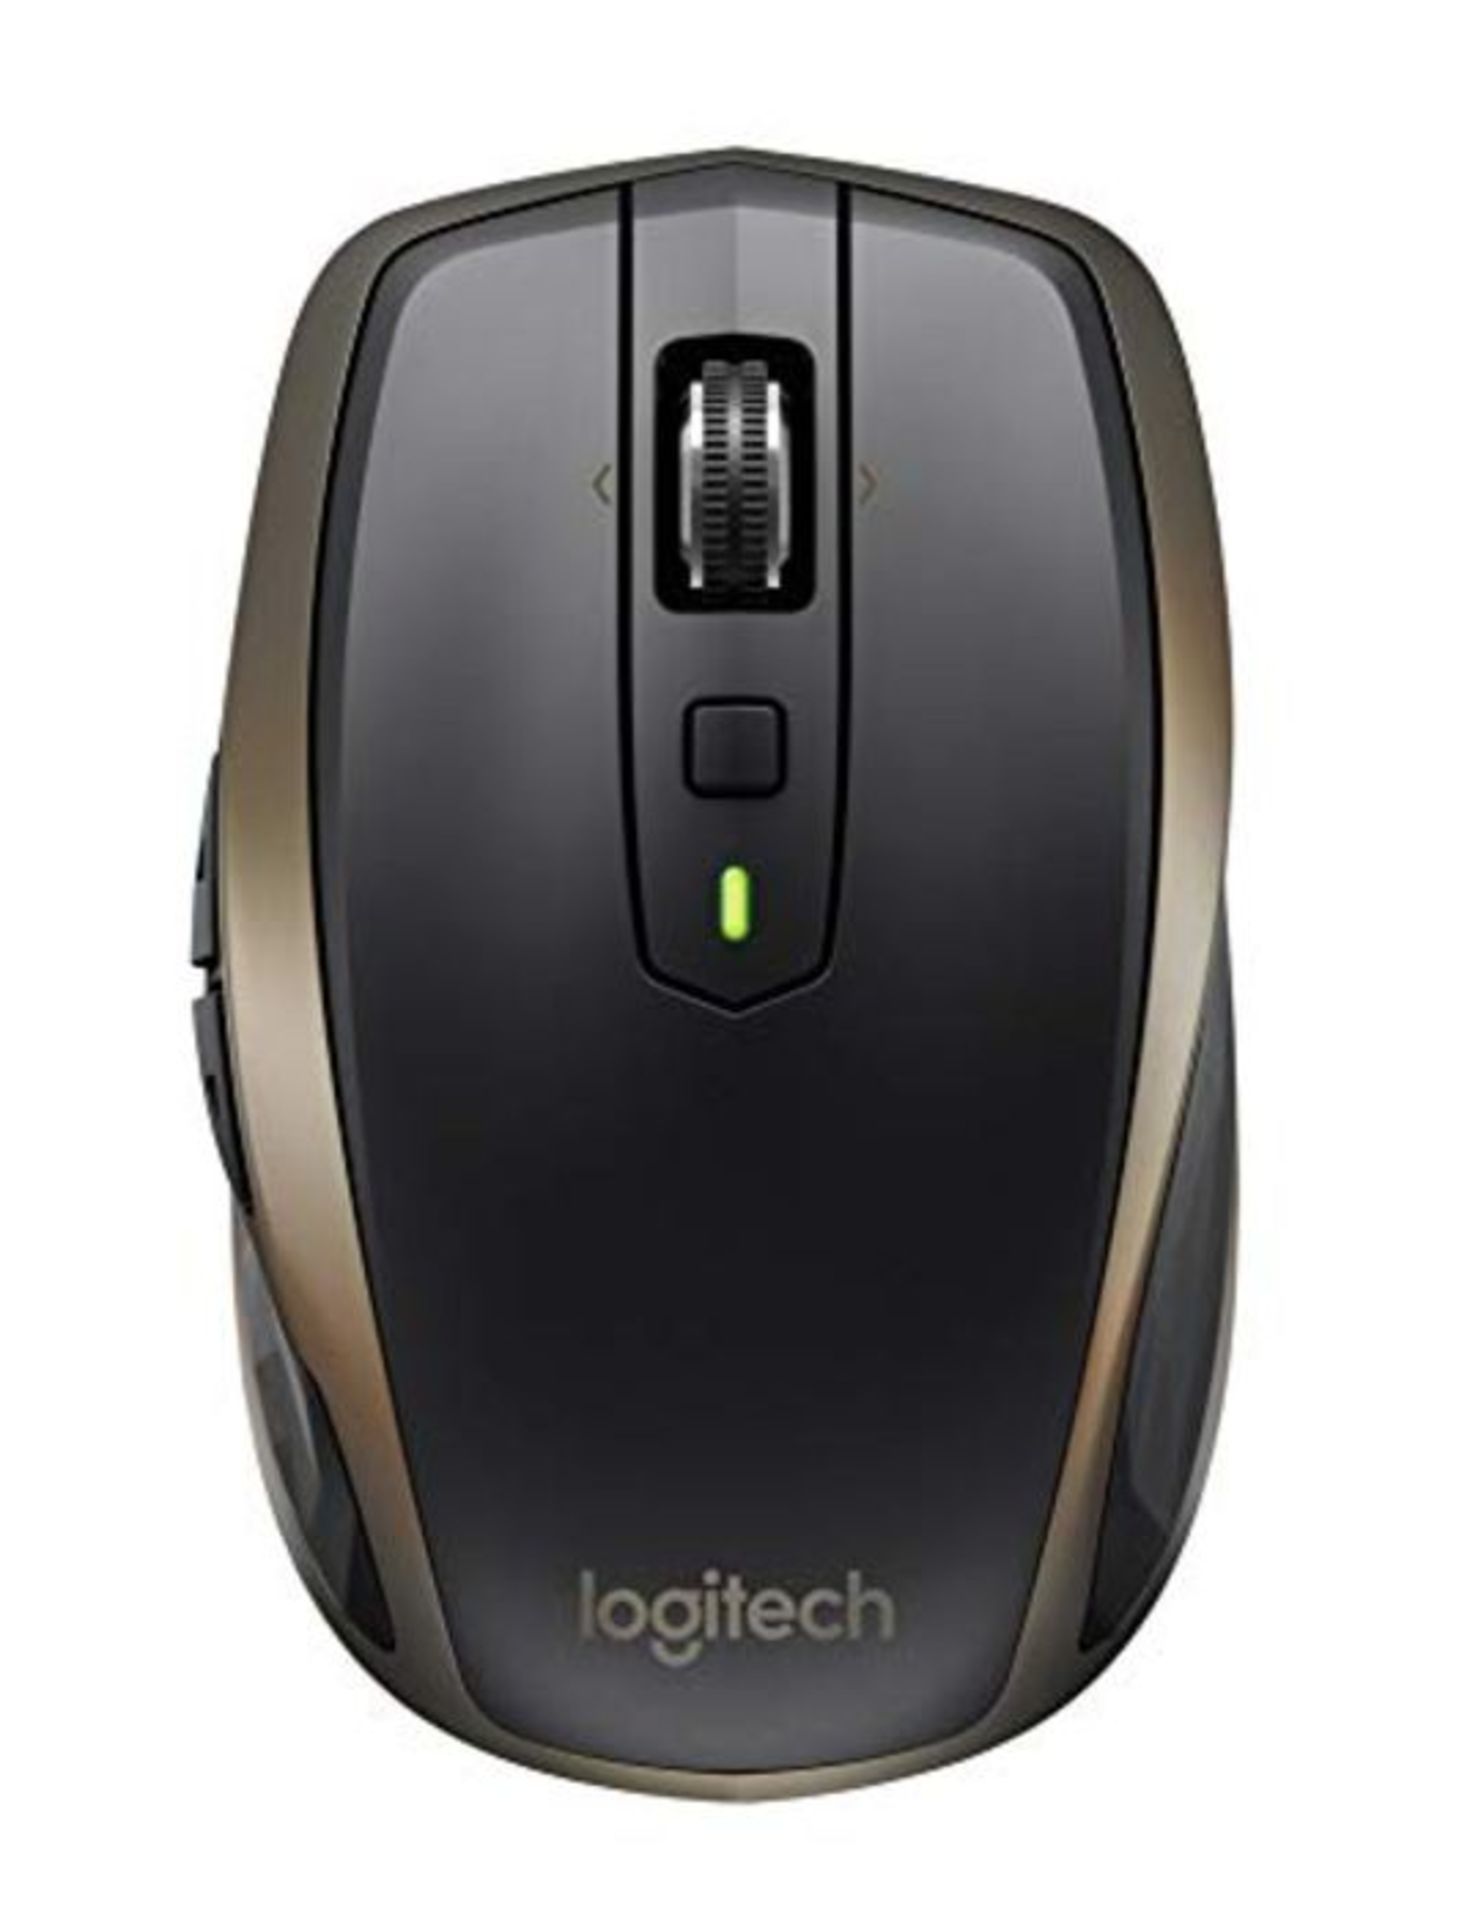 Logitech MX Anywhere 2 Wireless Mouse, Bluetooth or 2.4GHz Wireless Mouse with USB Uni